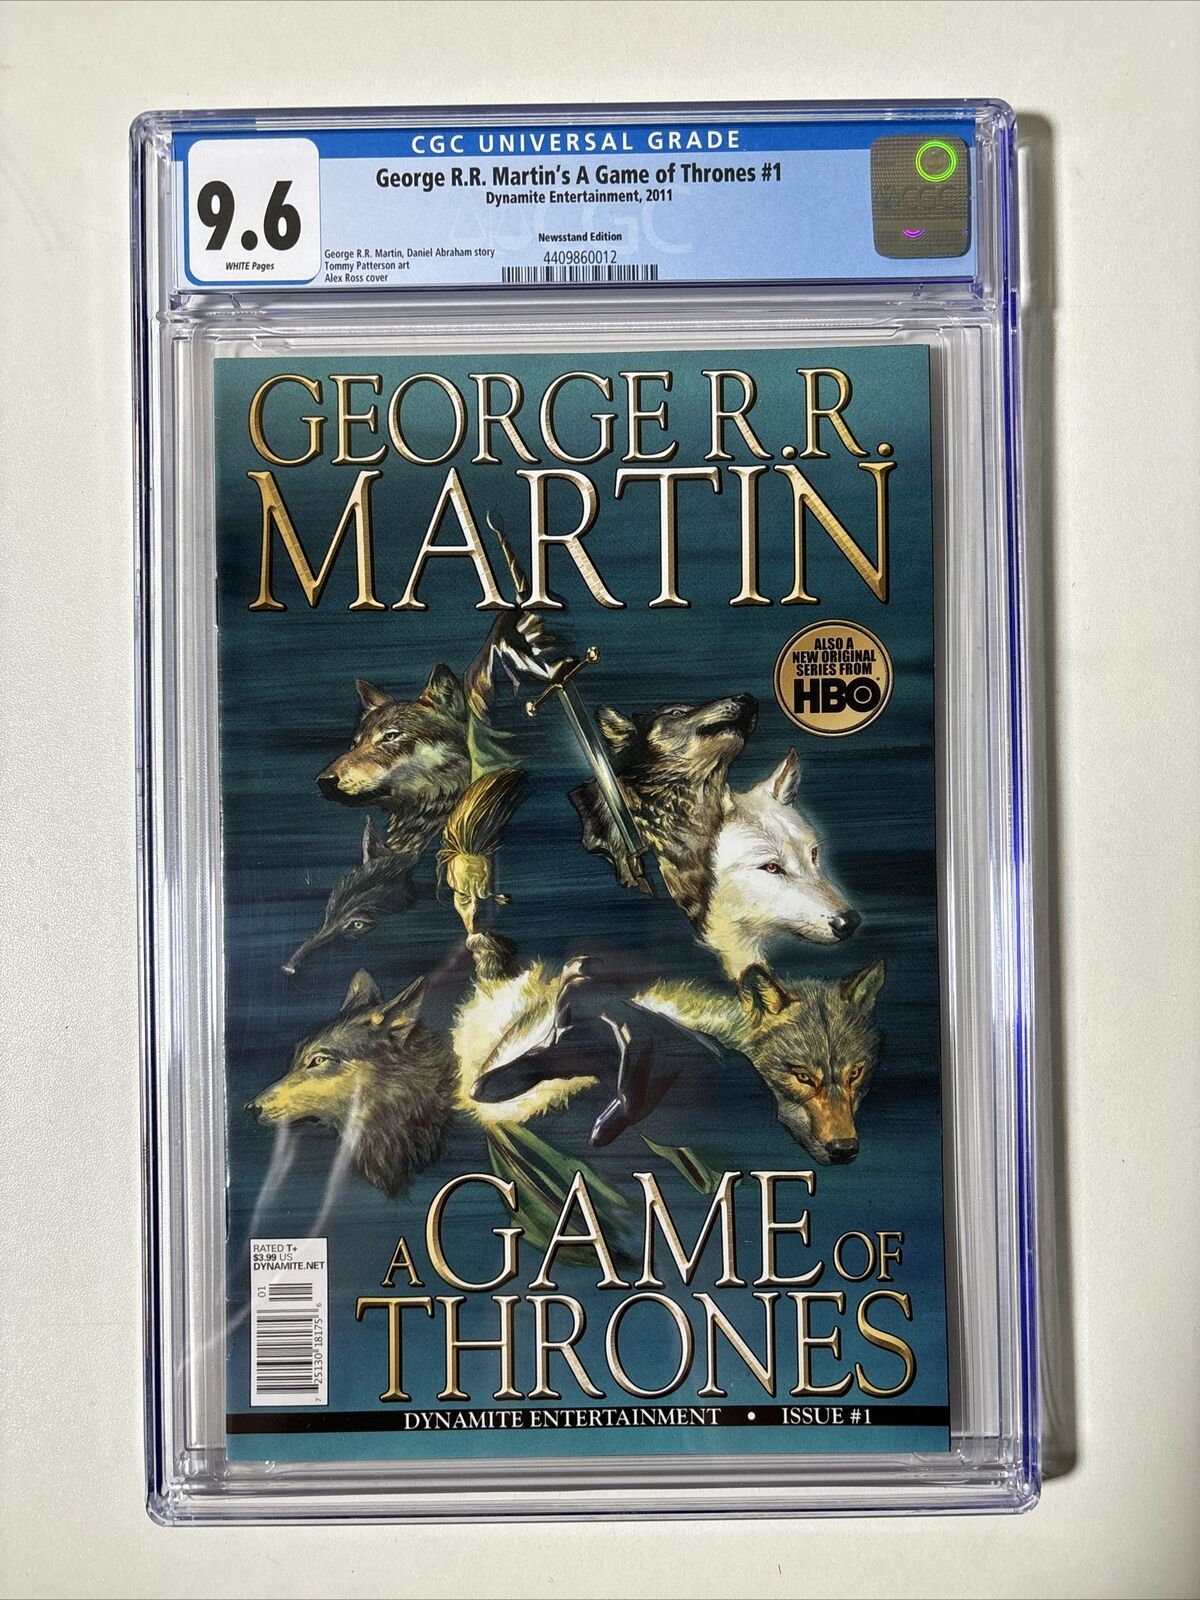 GEORGE R.R.MARTIN’S A GAME of THRONES#1 CGC UNIVERSAL GRADE 9.6